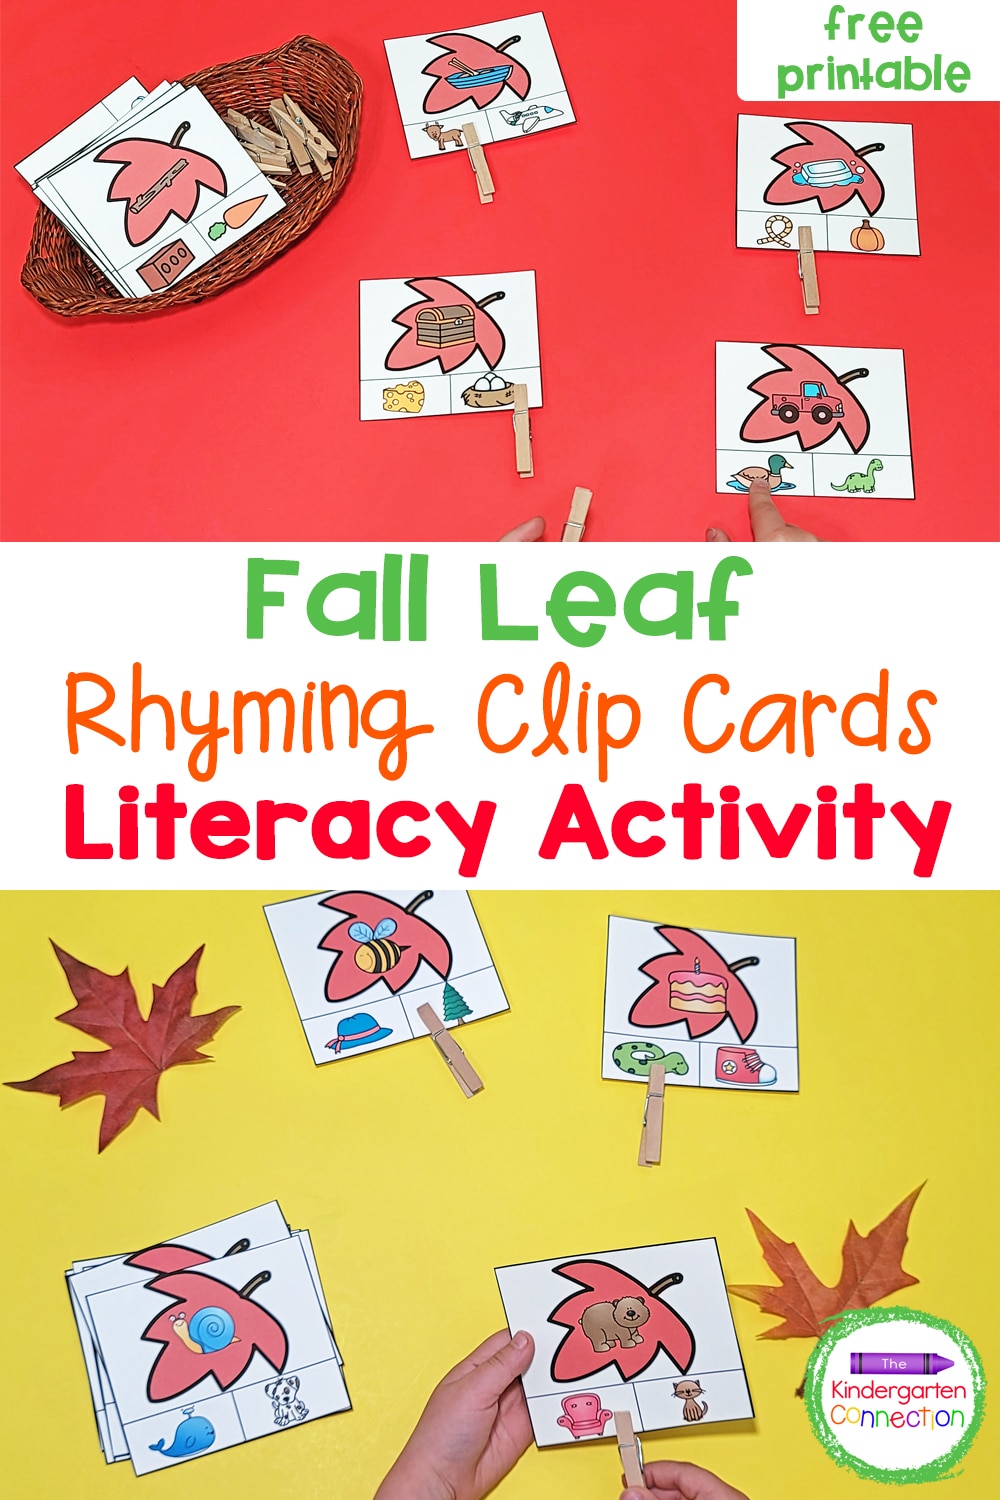 These free Fall Leaf Rhyming Clip Cards make learning how to rhyme fun while students work on fine motor skills too!